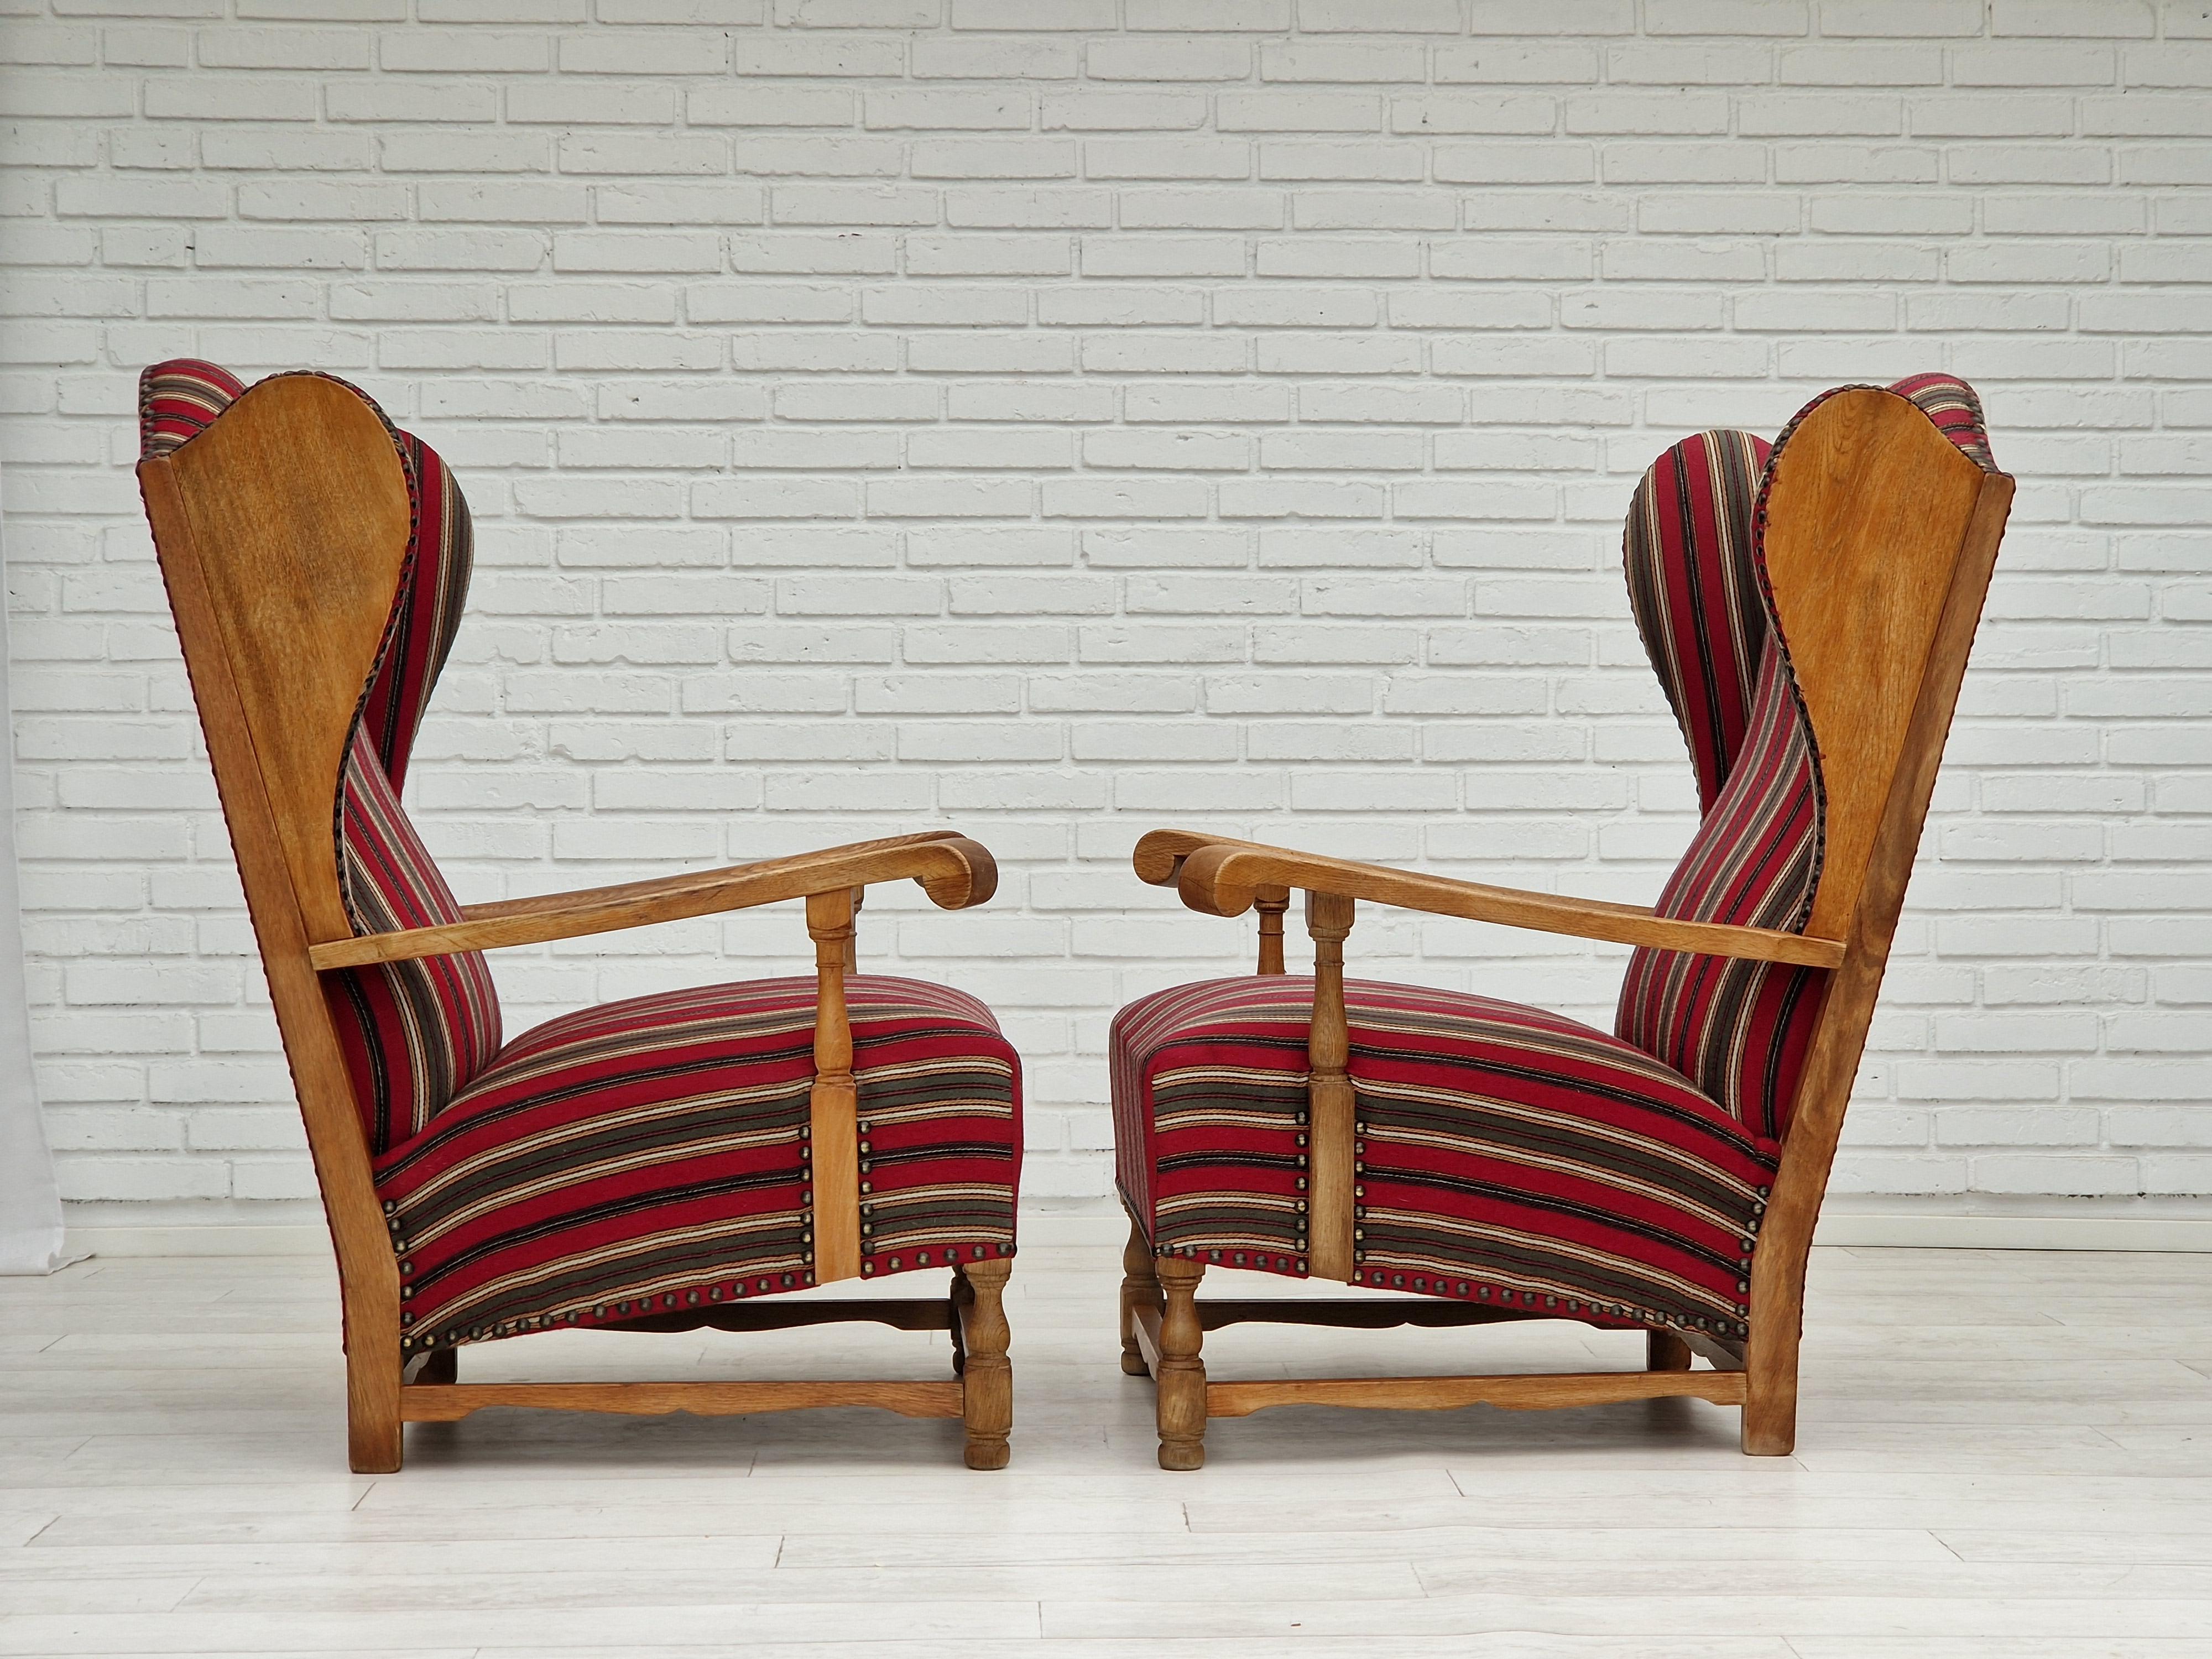 Mid-20th Century 1960s, Vintage Danish, Pair of Relax Chair, Original Condition For Sale